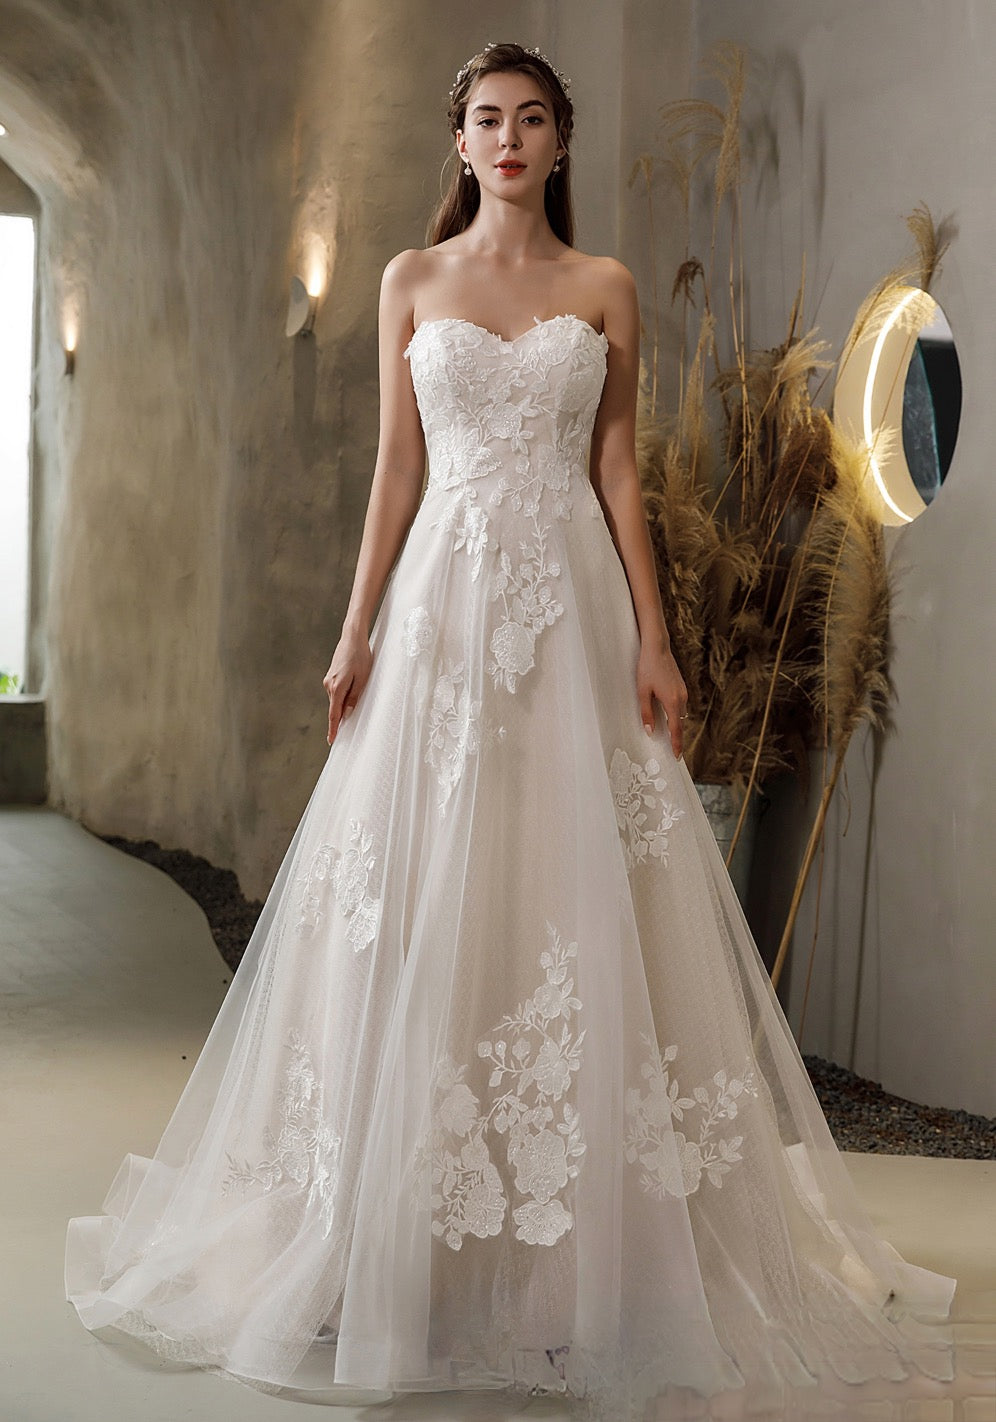 strapless wedding dresses with diamonds and lace